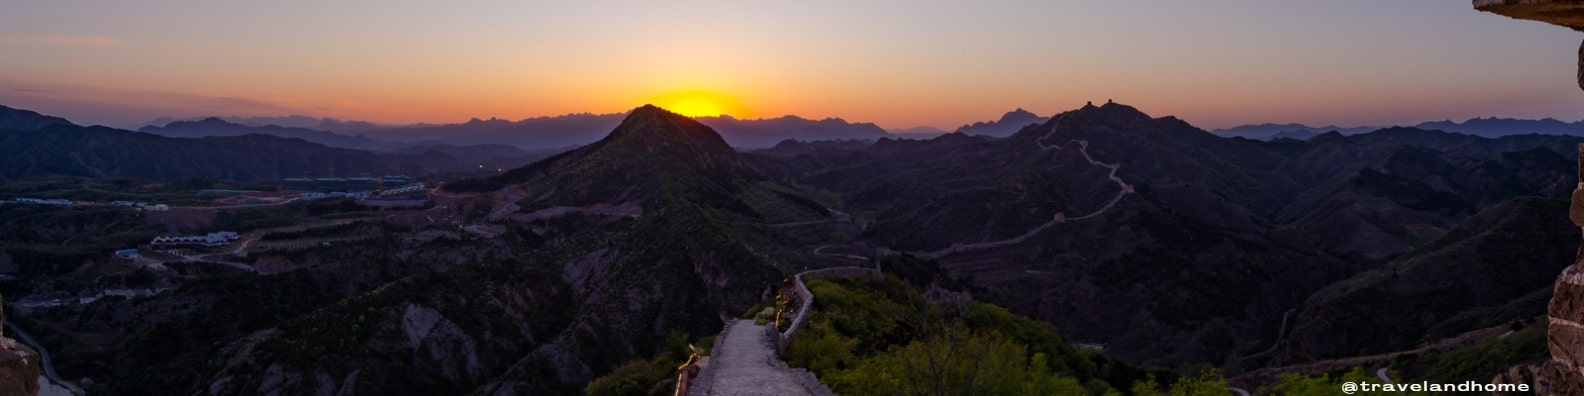 The Great Wall of China at sunset travel and home min